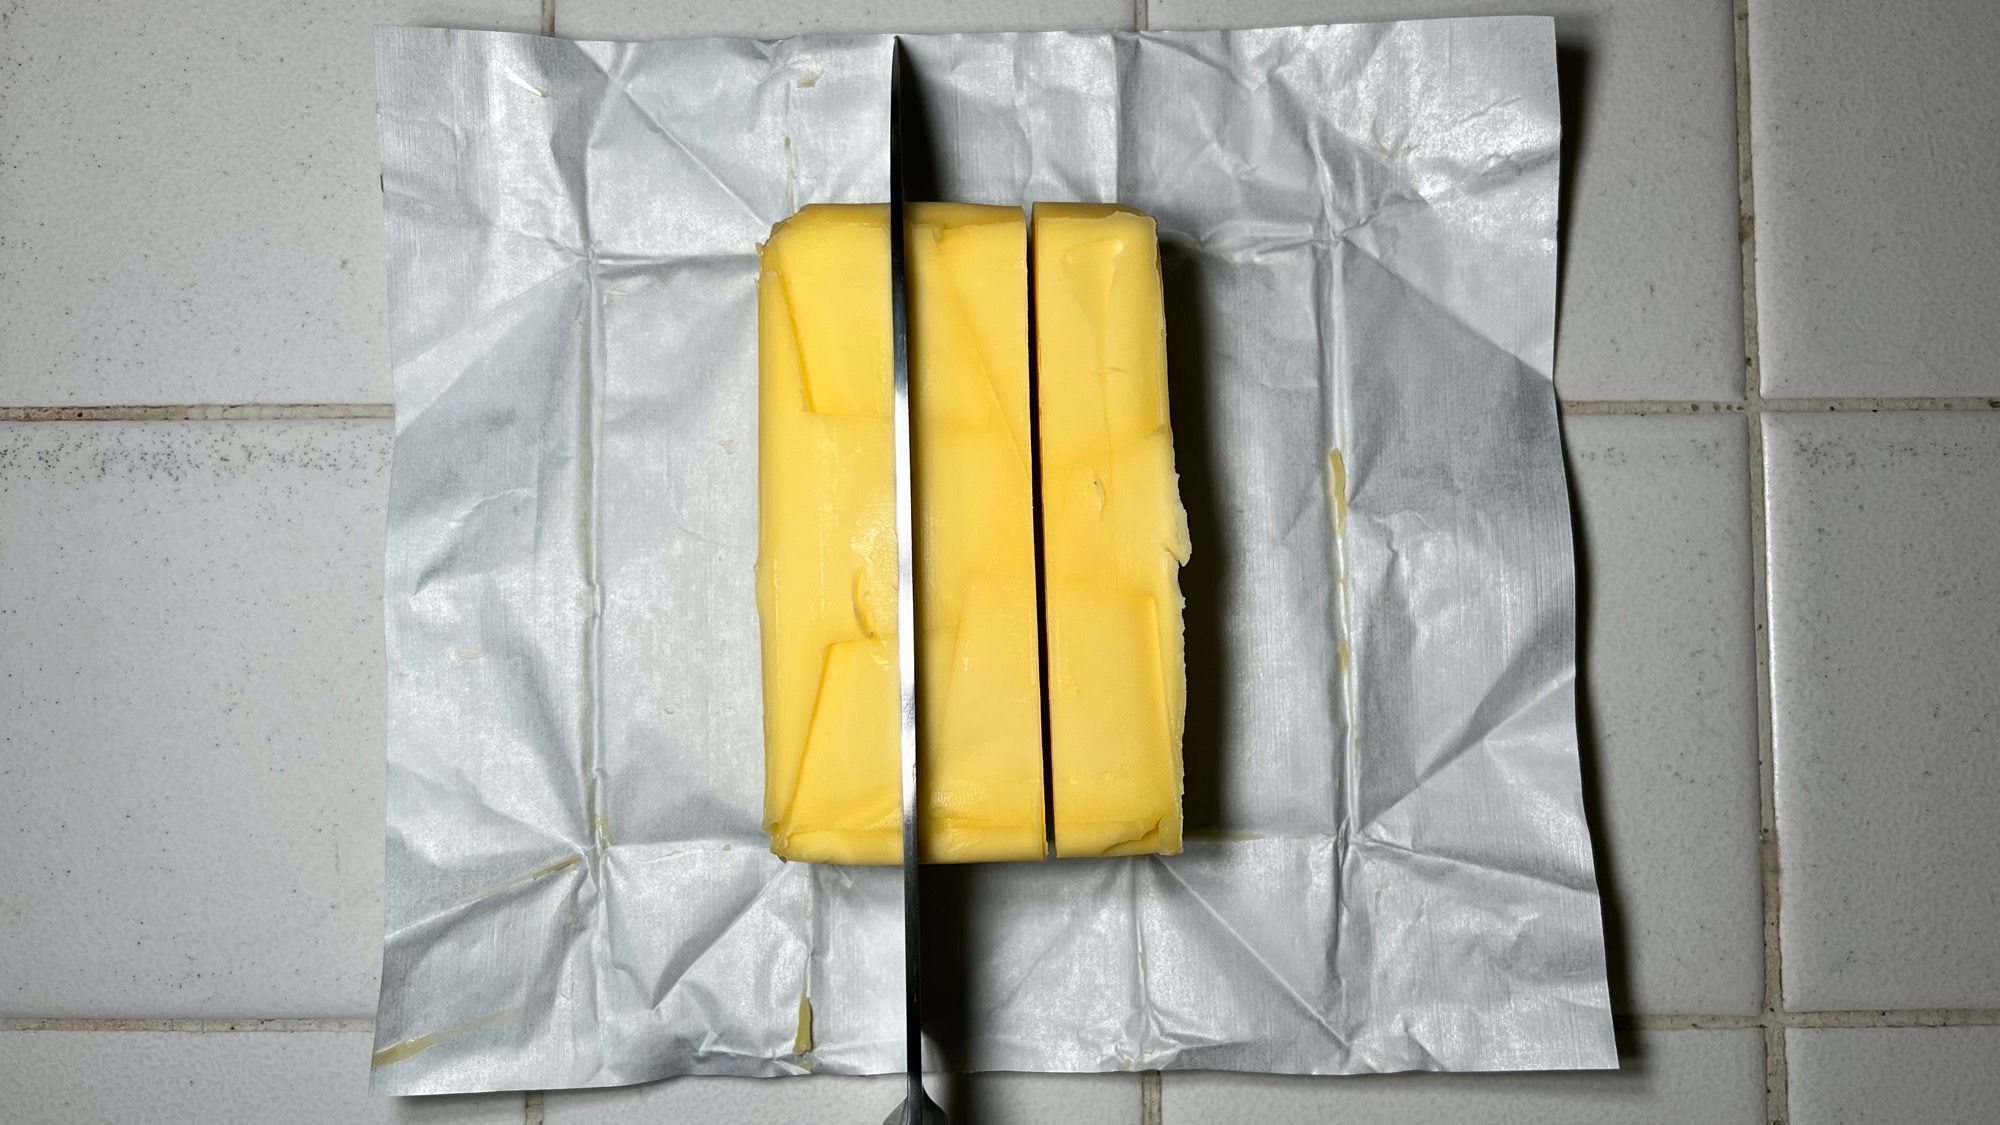 Separate Butter Pats Slice